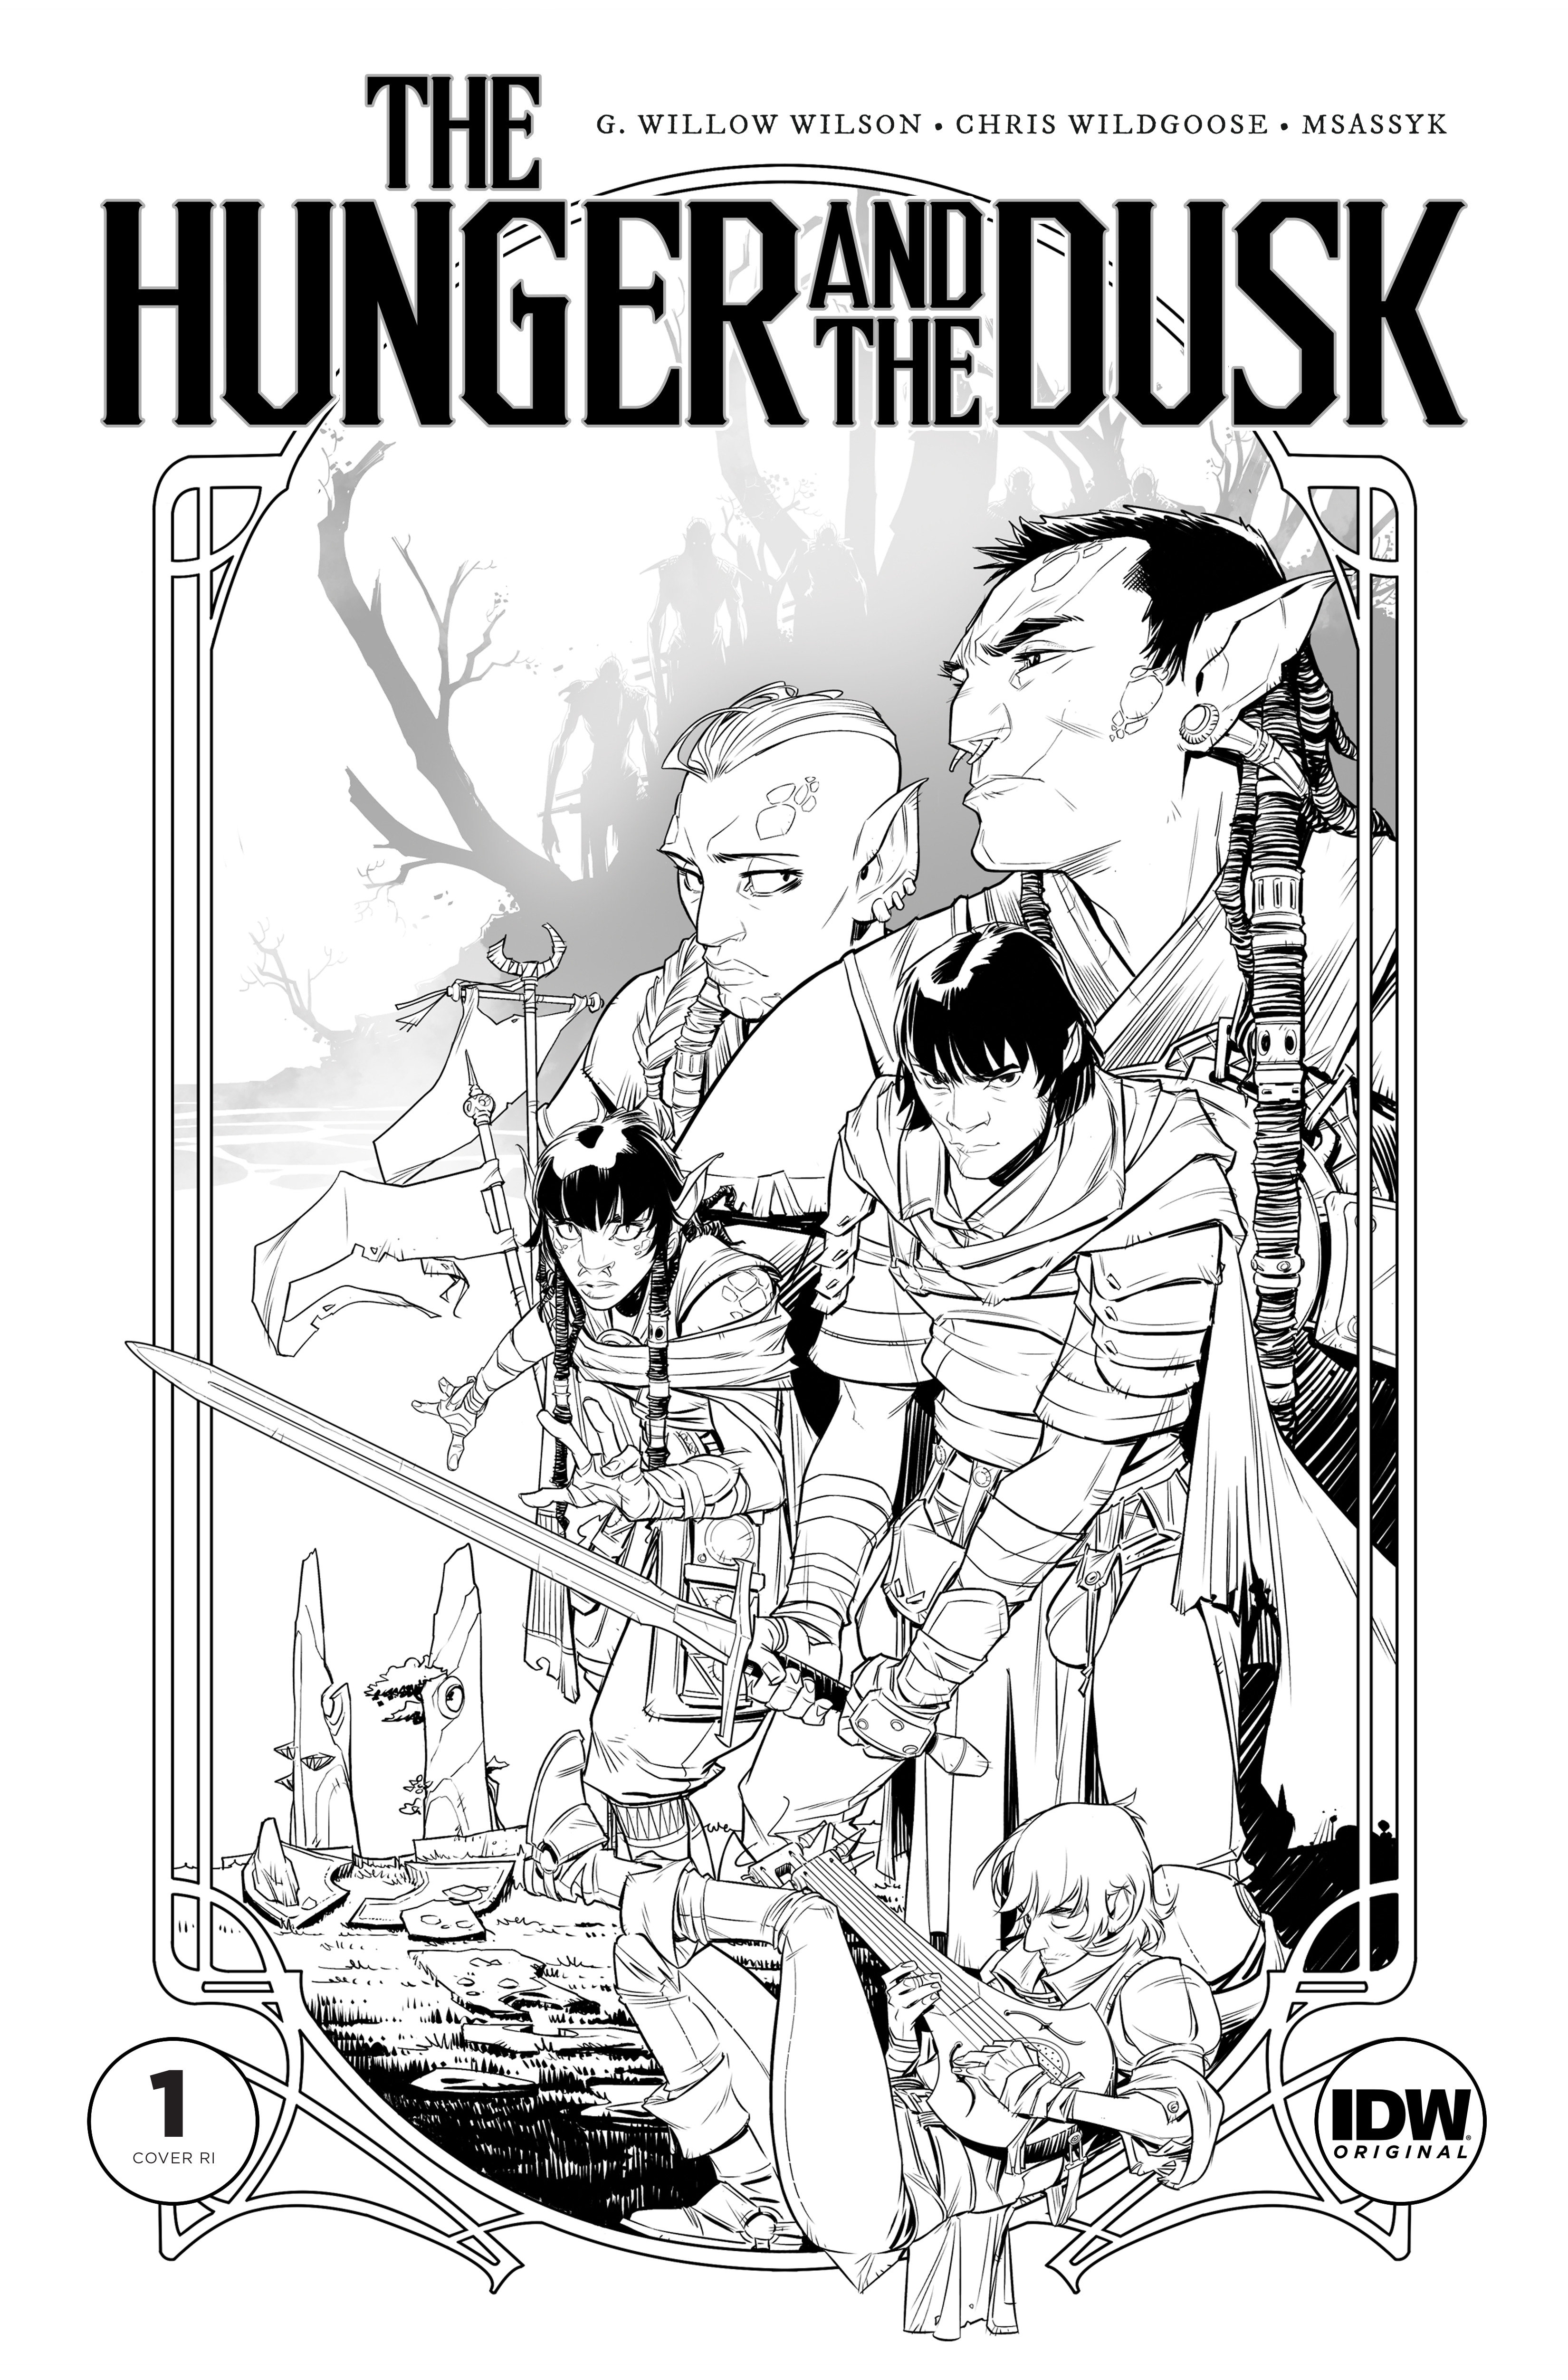 Hunger and the Dusk #1 Cover F 1 for 50 Incentive Wildgoose Black & White